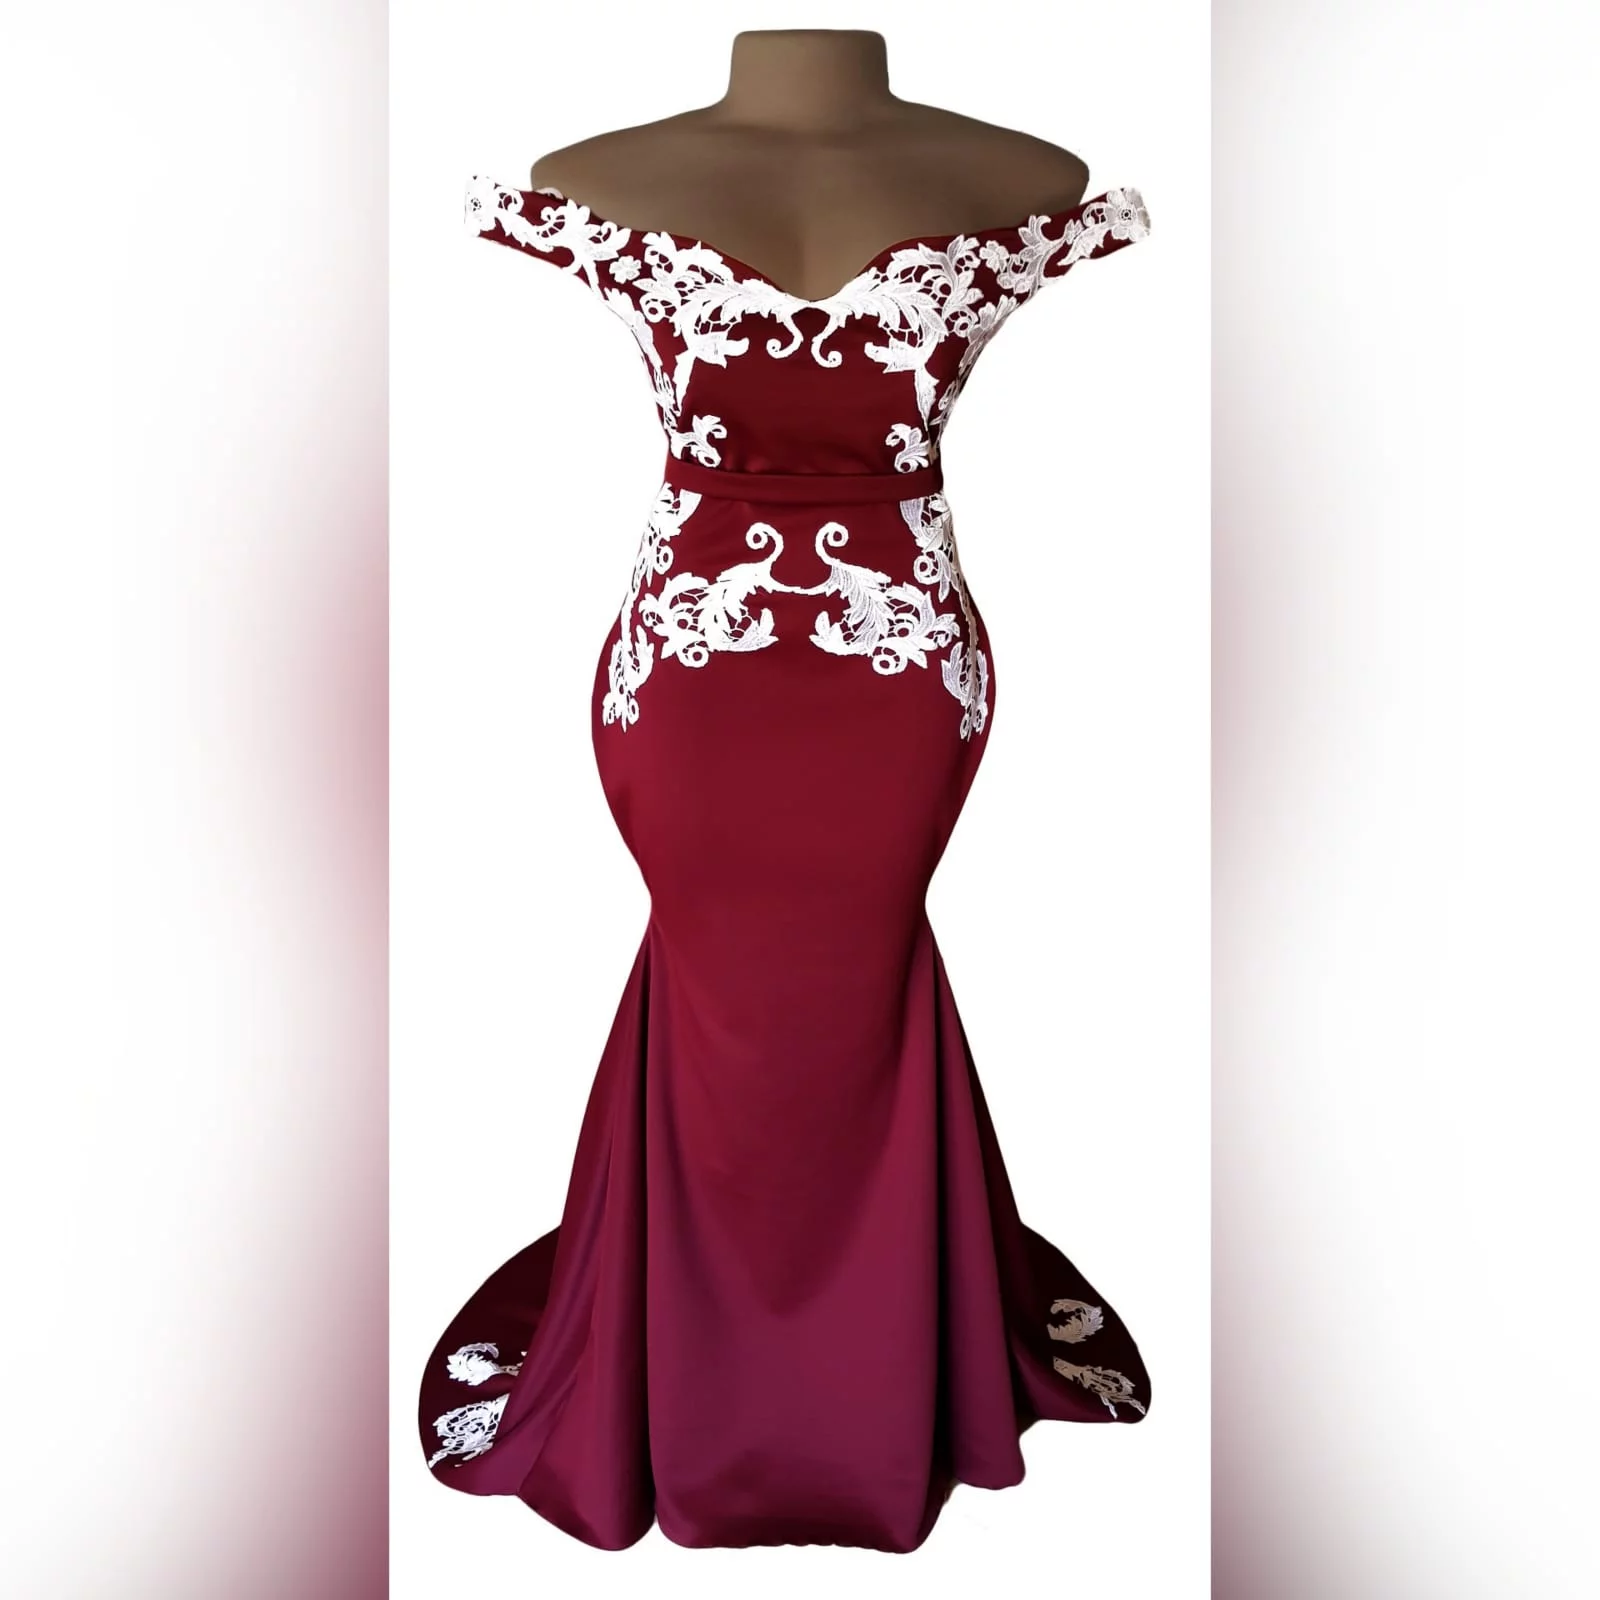 Maroon and white off shoulder soft mermaid prom dress 7 maroon and white off shoulder soft mermaid prom dress. With bodice, hips and train detailed with white lace.